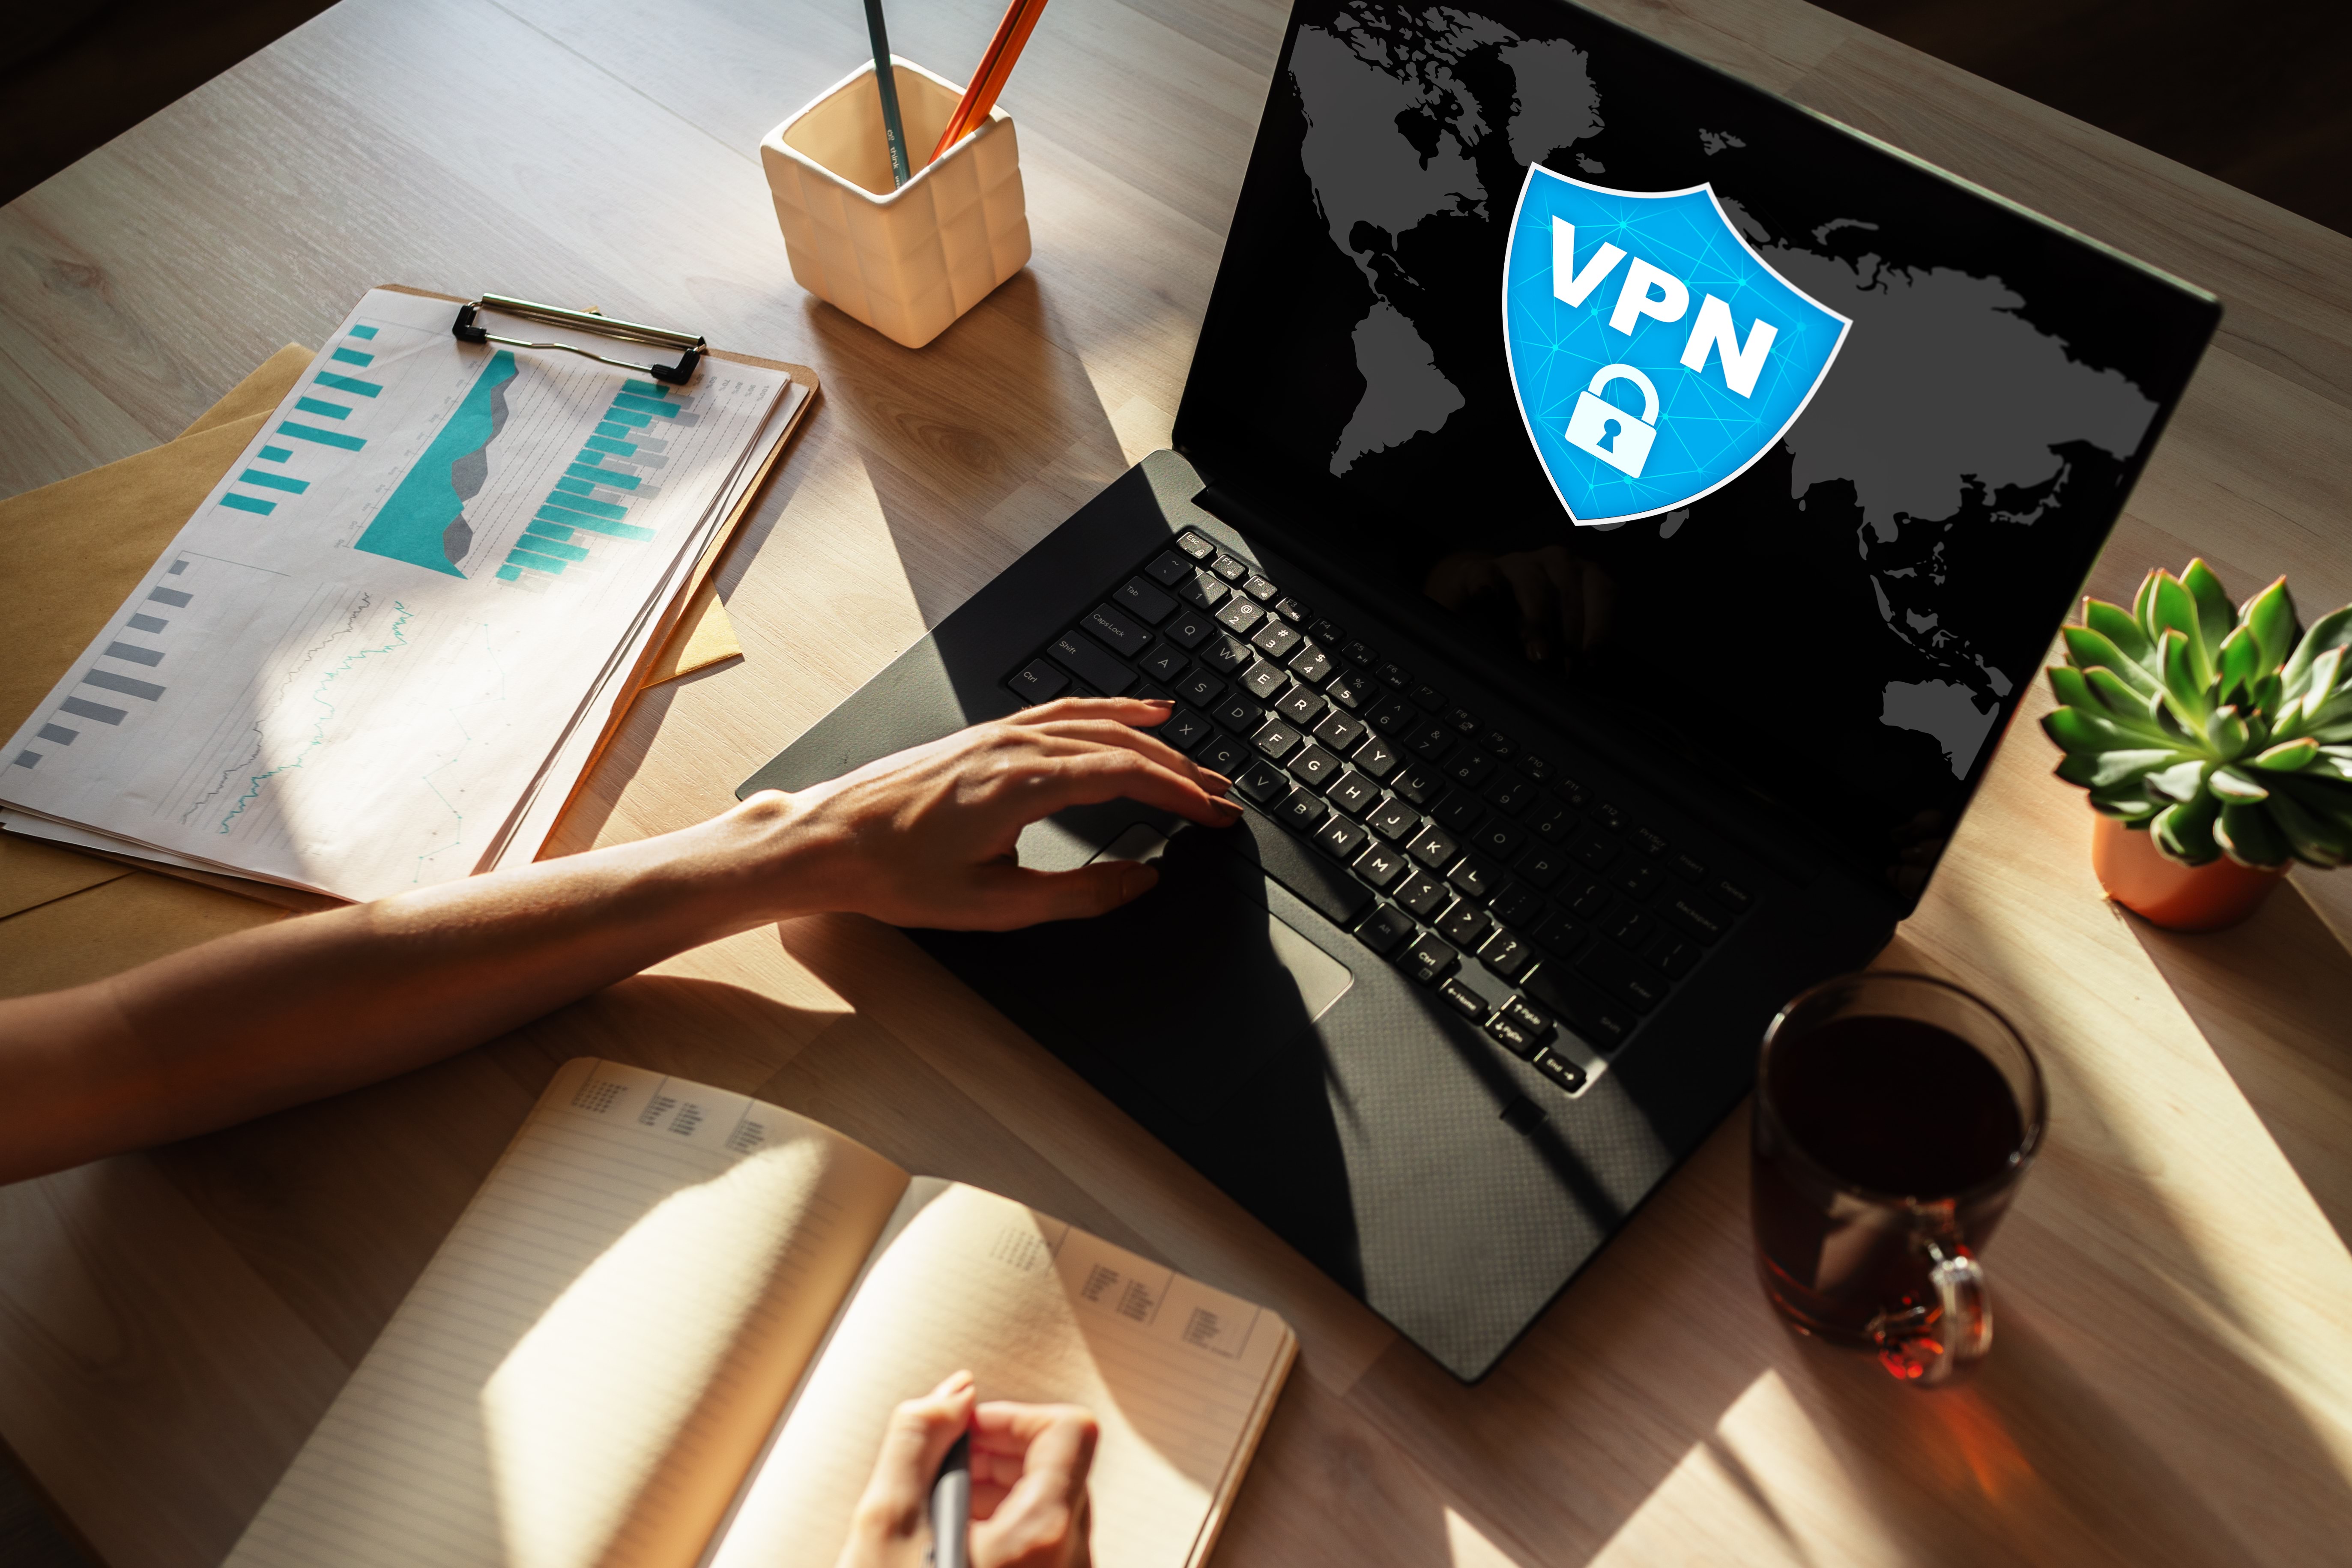 image from above of a laptop with VPN